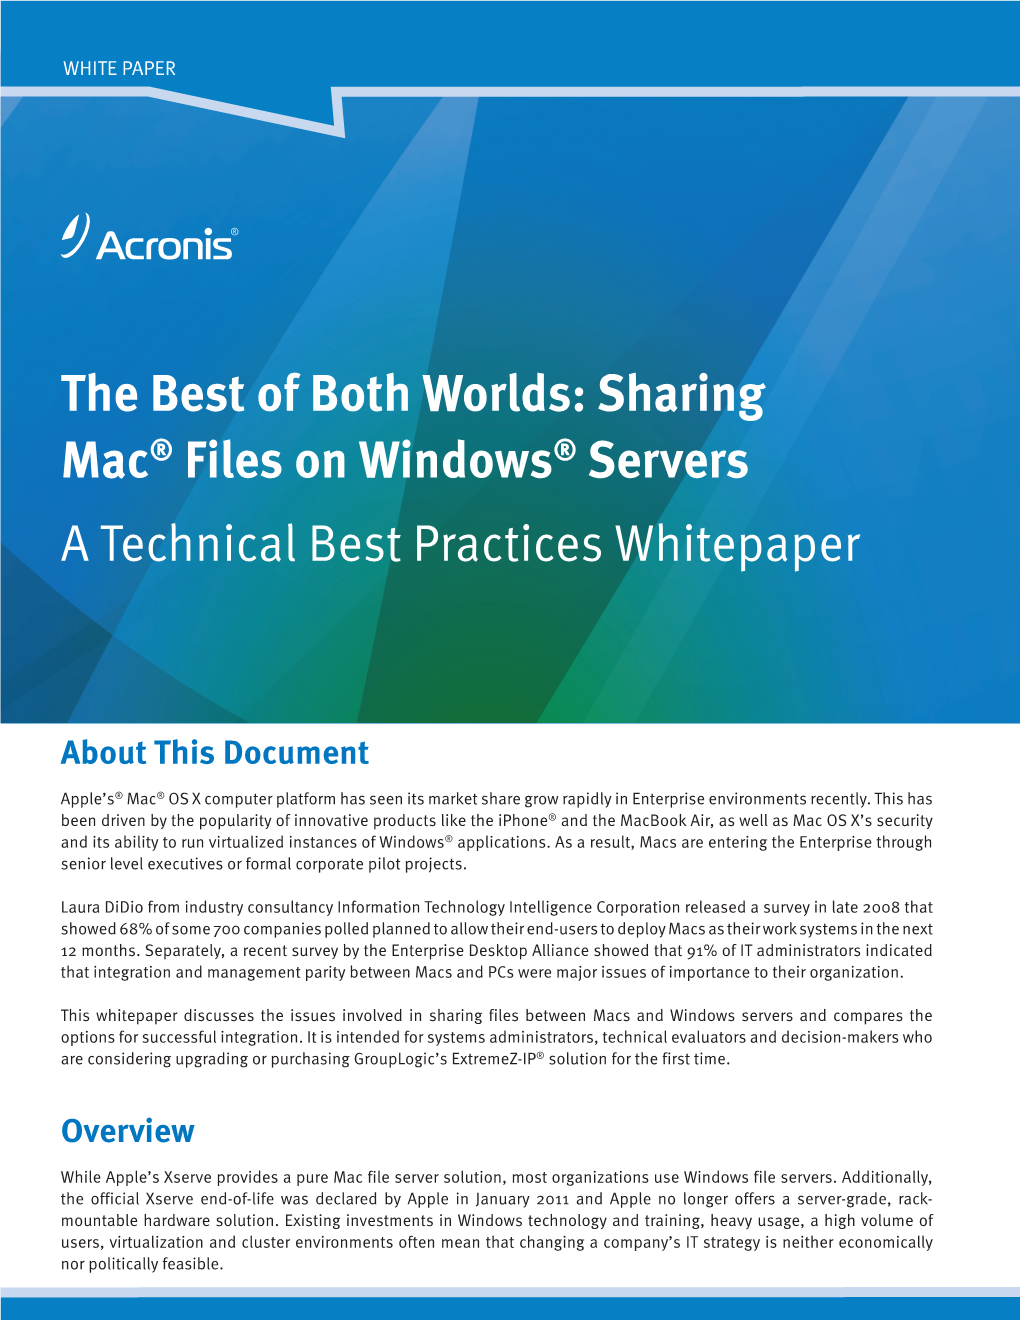 Sharing Mac® Files on Windows® Servers a Technical Best Practices Whitepaper